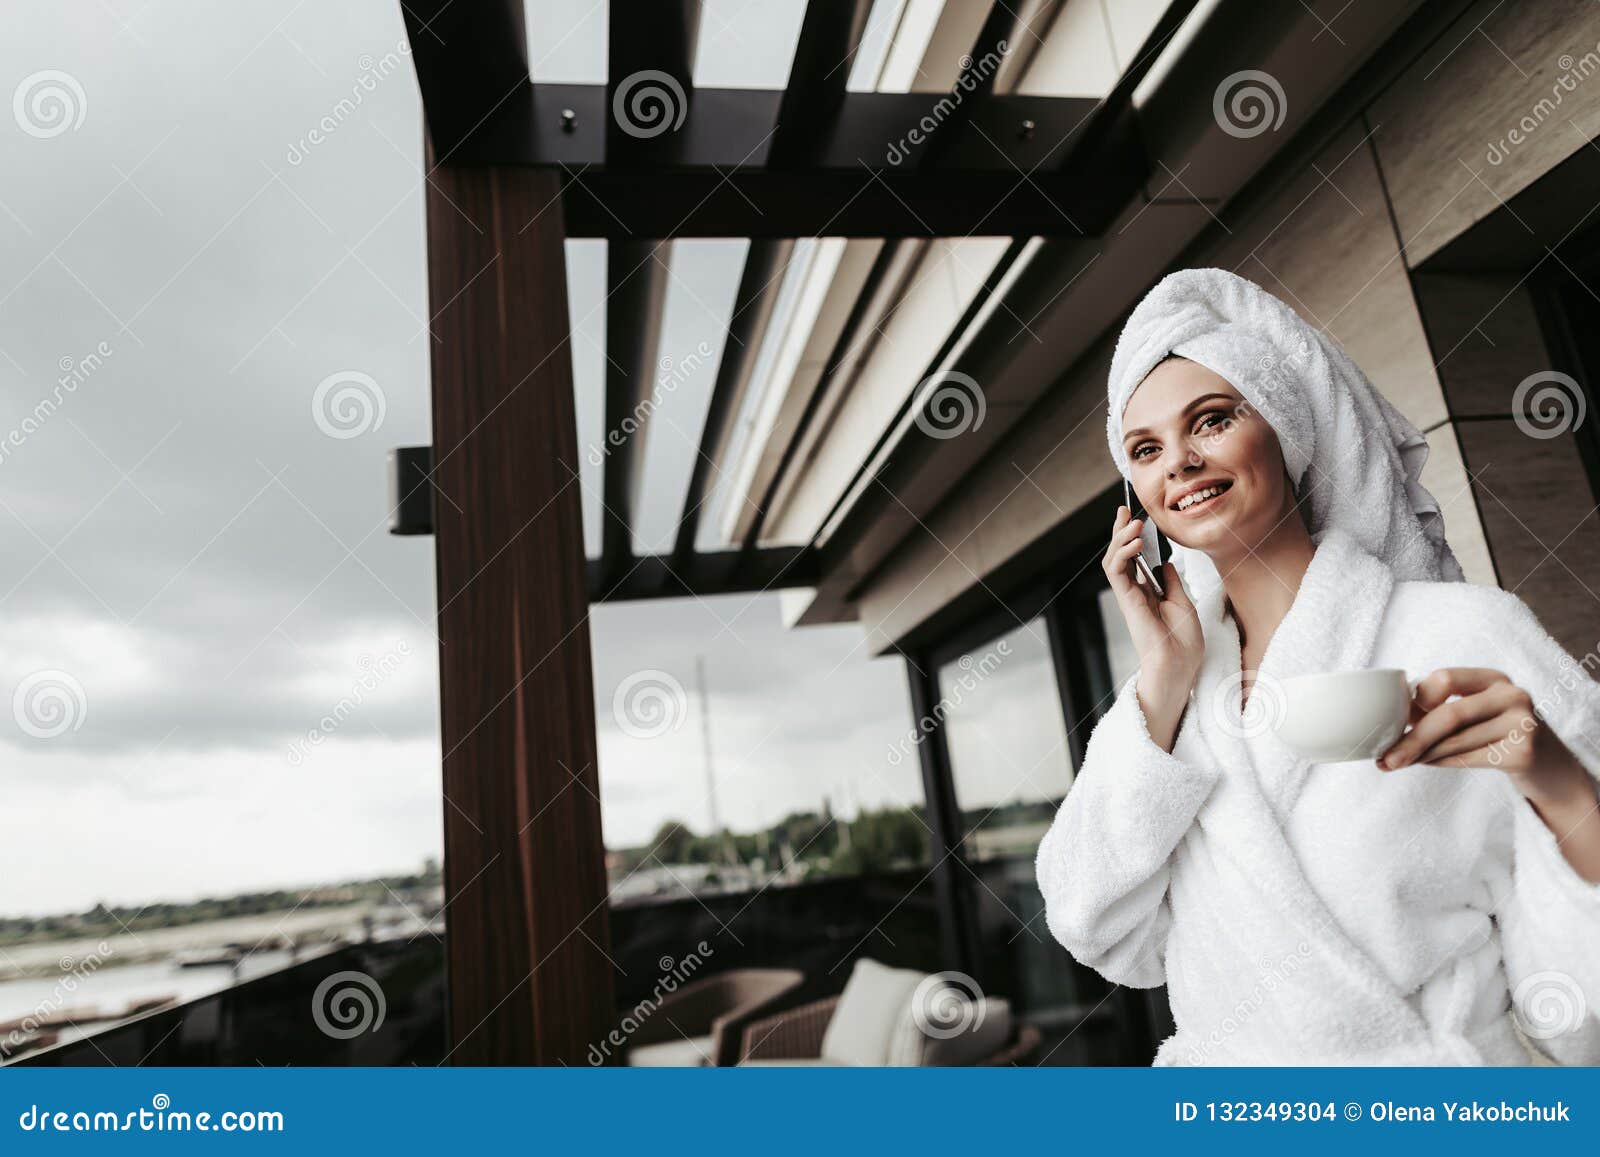 Young Woman in Bathrobe Talking by Phone Stock Photo - Image of ...